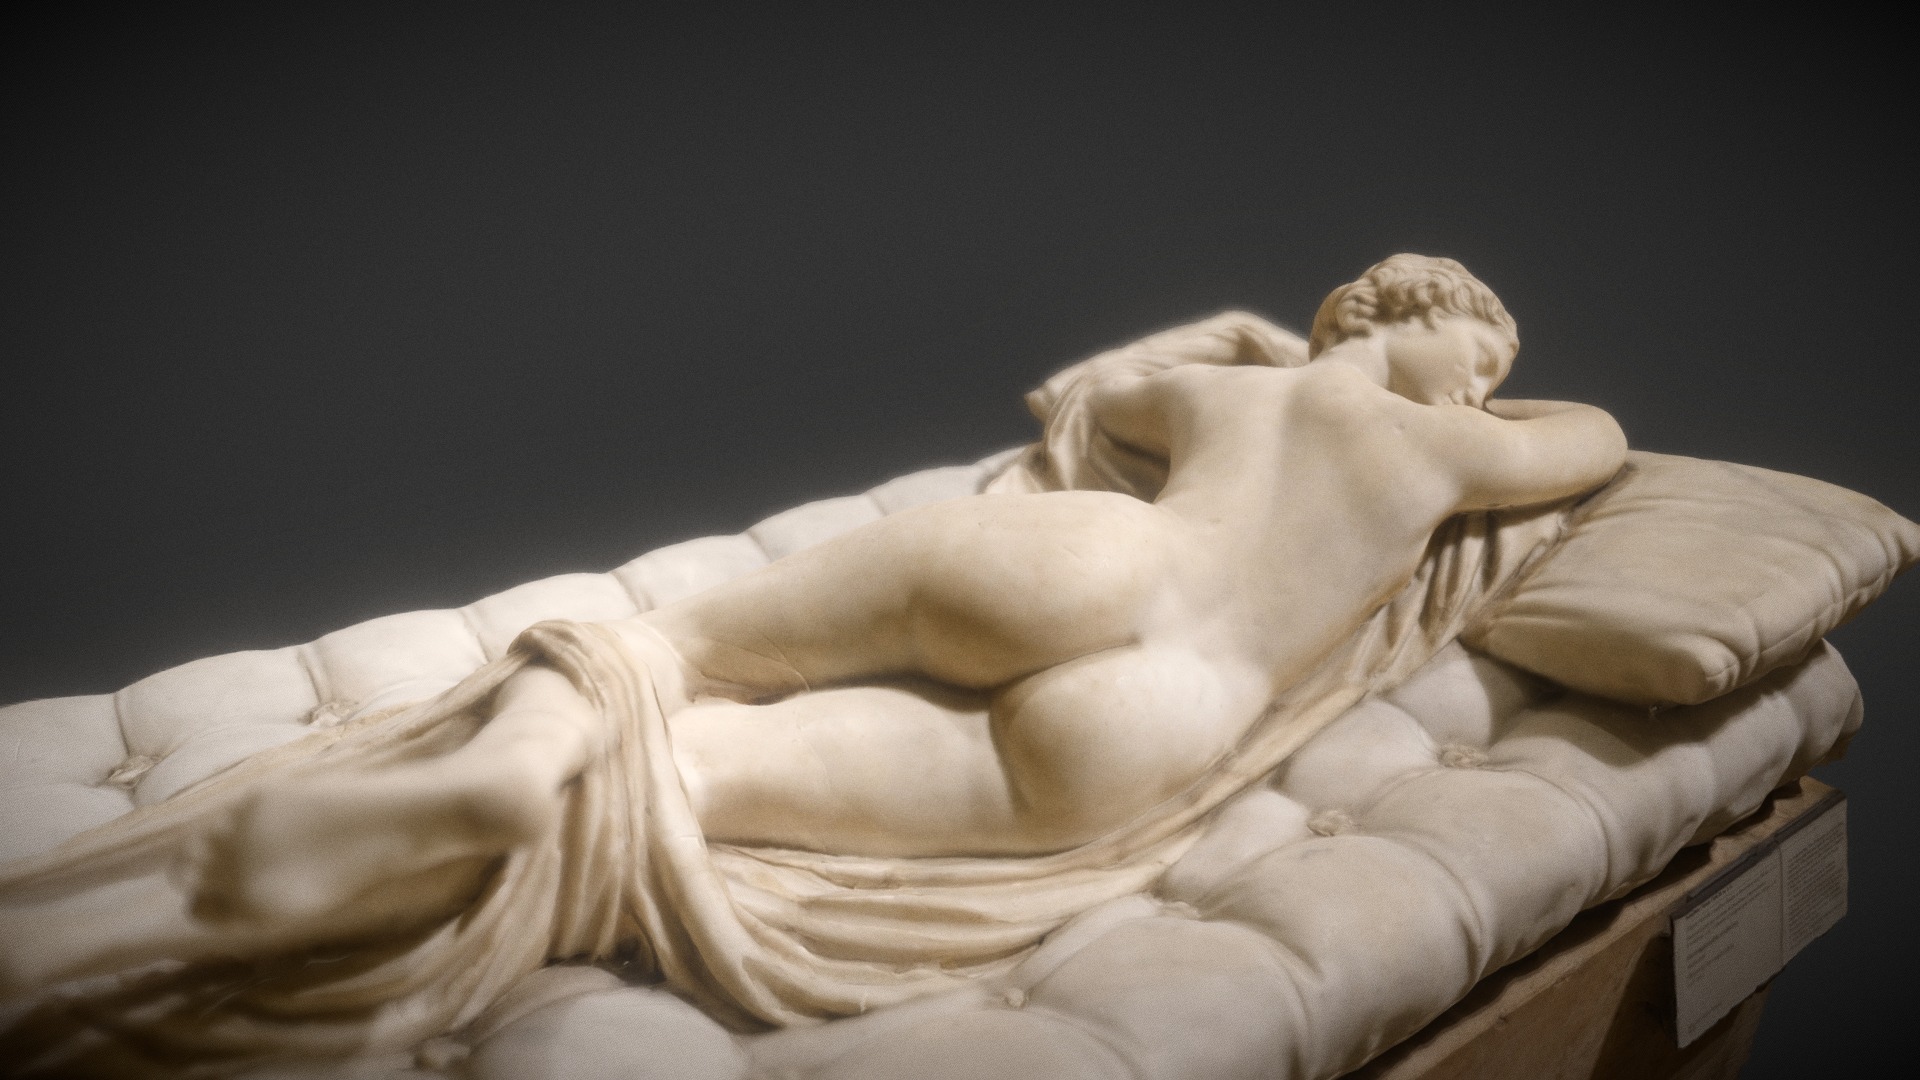 Reality Capture from Louvre, Paris

The ambivalence and voluptuous curves of this figure of Hermaphroditos, who lies asleep on a mattress sculpted by Bernini, are still a source of fascination today. His body merged with that of the nymph Salmacis, whose advances he had rejected, Hermaphroditos, son of Hermes and Aphrodite, is represented as a bisexed figure. The original that inspired this figure would have dated from the 2nd century BC, reflecting the late Hellenistic taste for the theatrical.

Discovered in Rome near the Baths of Diocletian in 1608, this statue was one of the most admired masterpieces of the Borghese Collection in the 17th and 18th centuries. In 1619, Cardinal Scipione Borghese commissioned the Baroque Italian sculptor Bernini to carve the mattress on which the ancient marble now lies 3d model